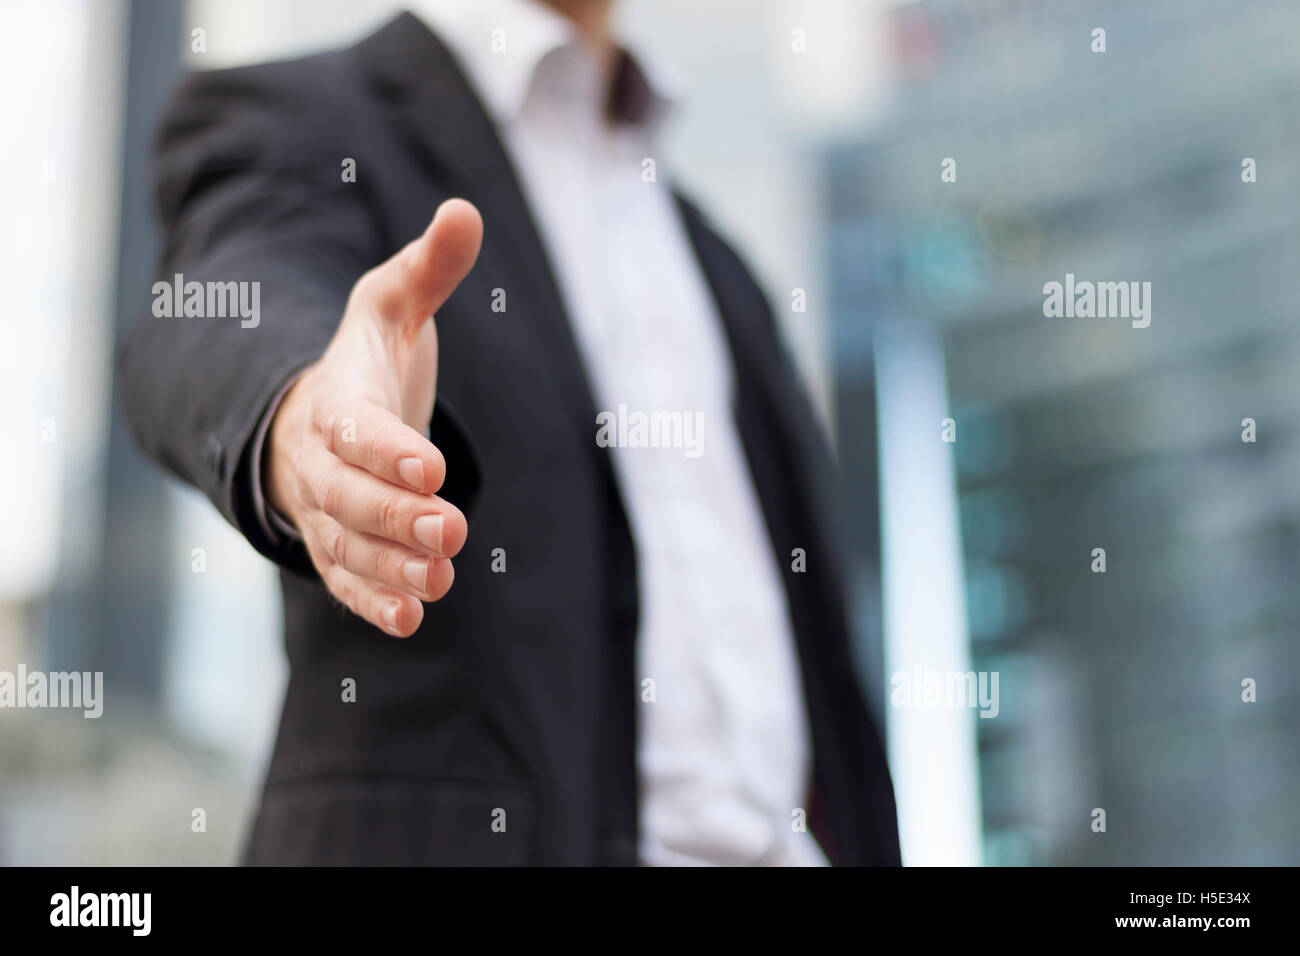 Businessman with an open hand ready to seal a deal Stock Photo